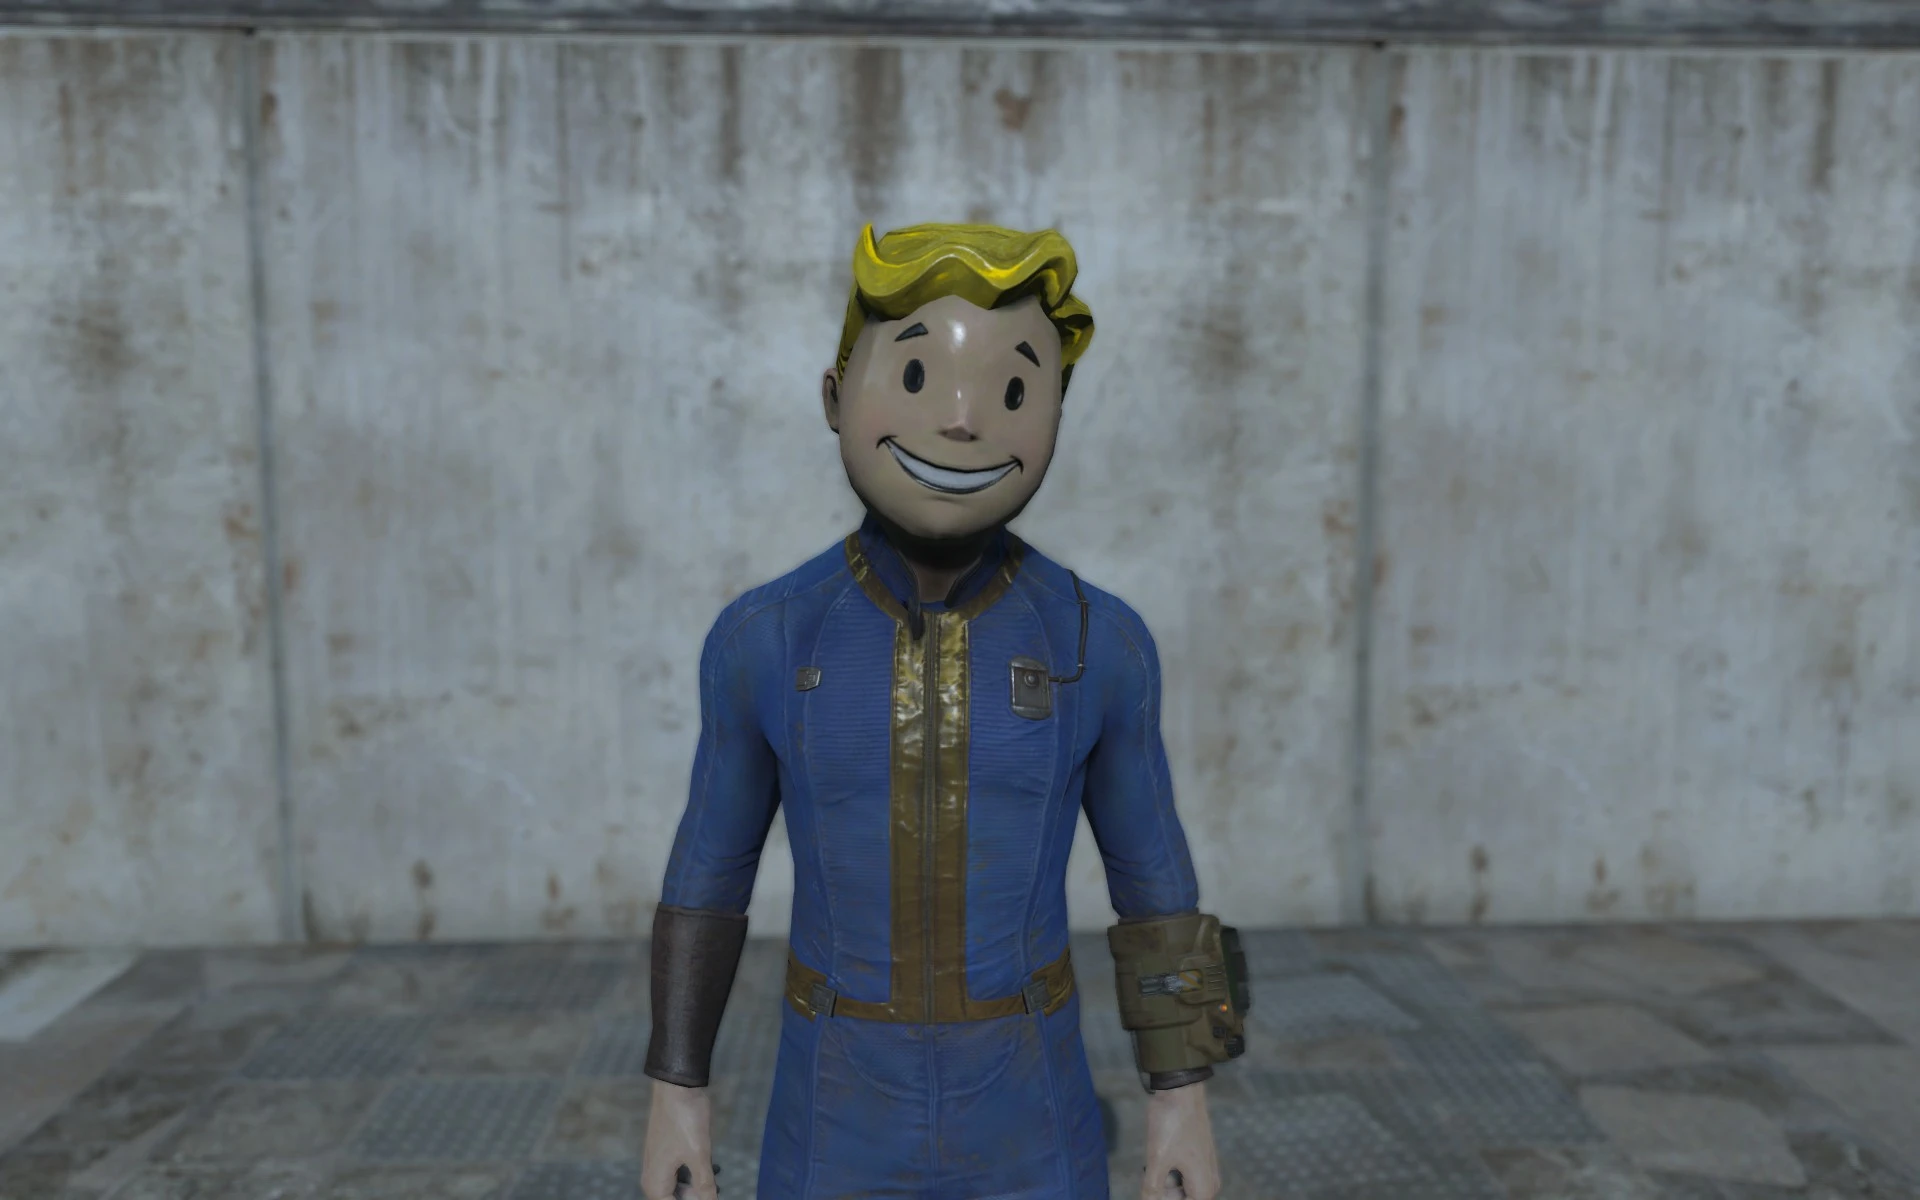 Gallery of Fallout Vault Boy Mask.